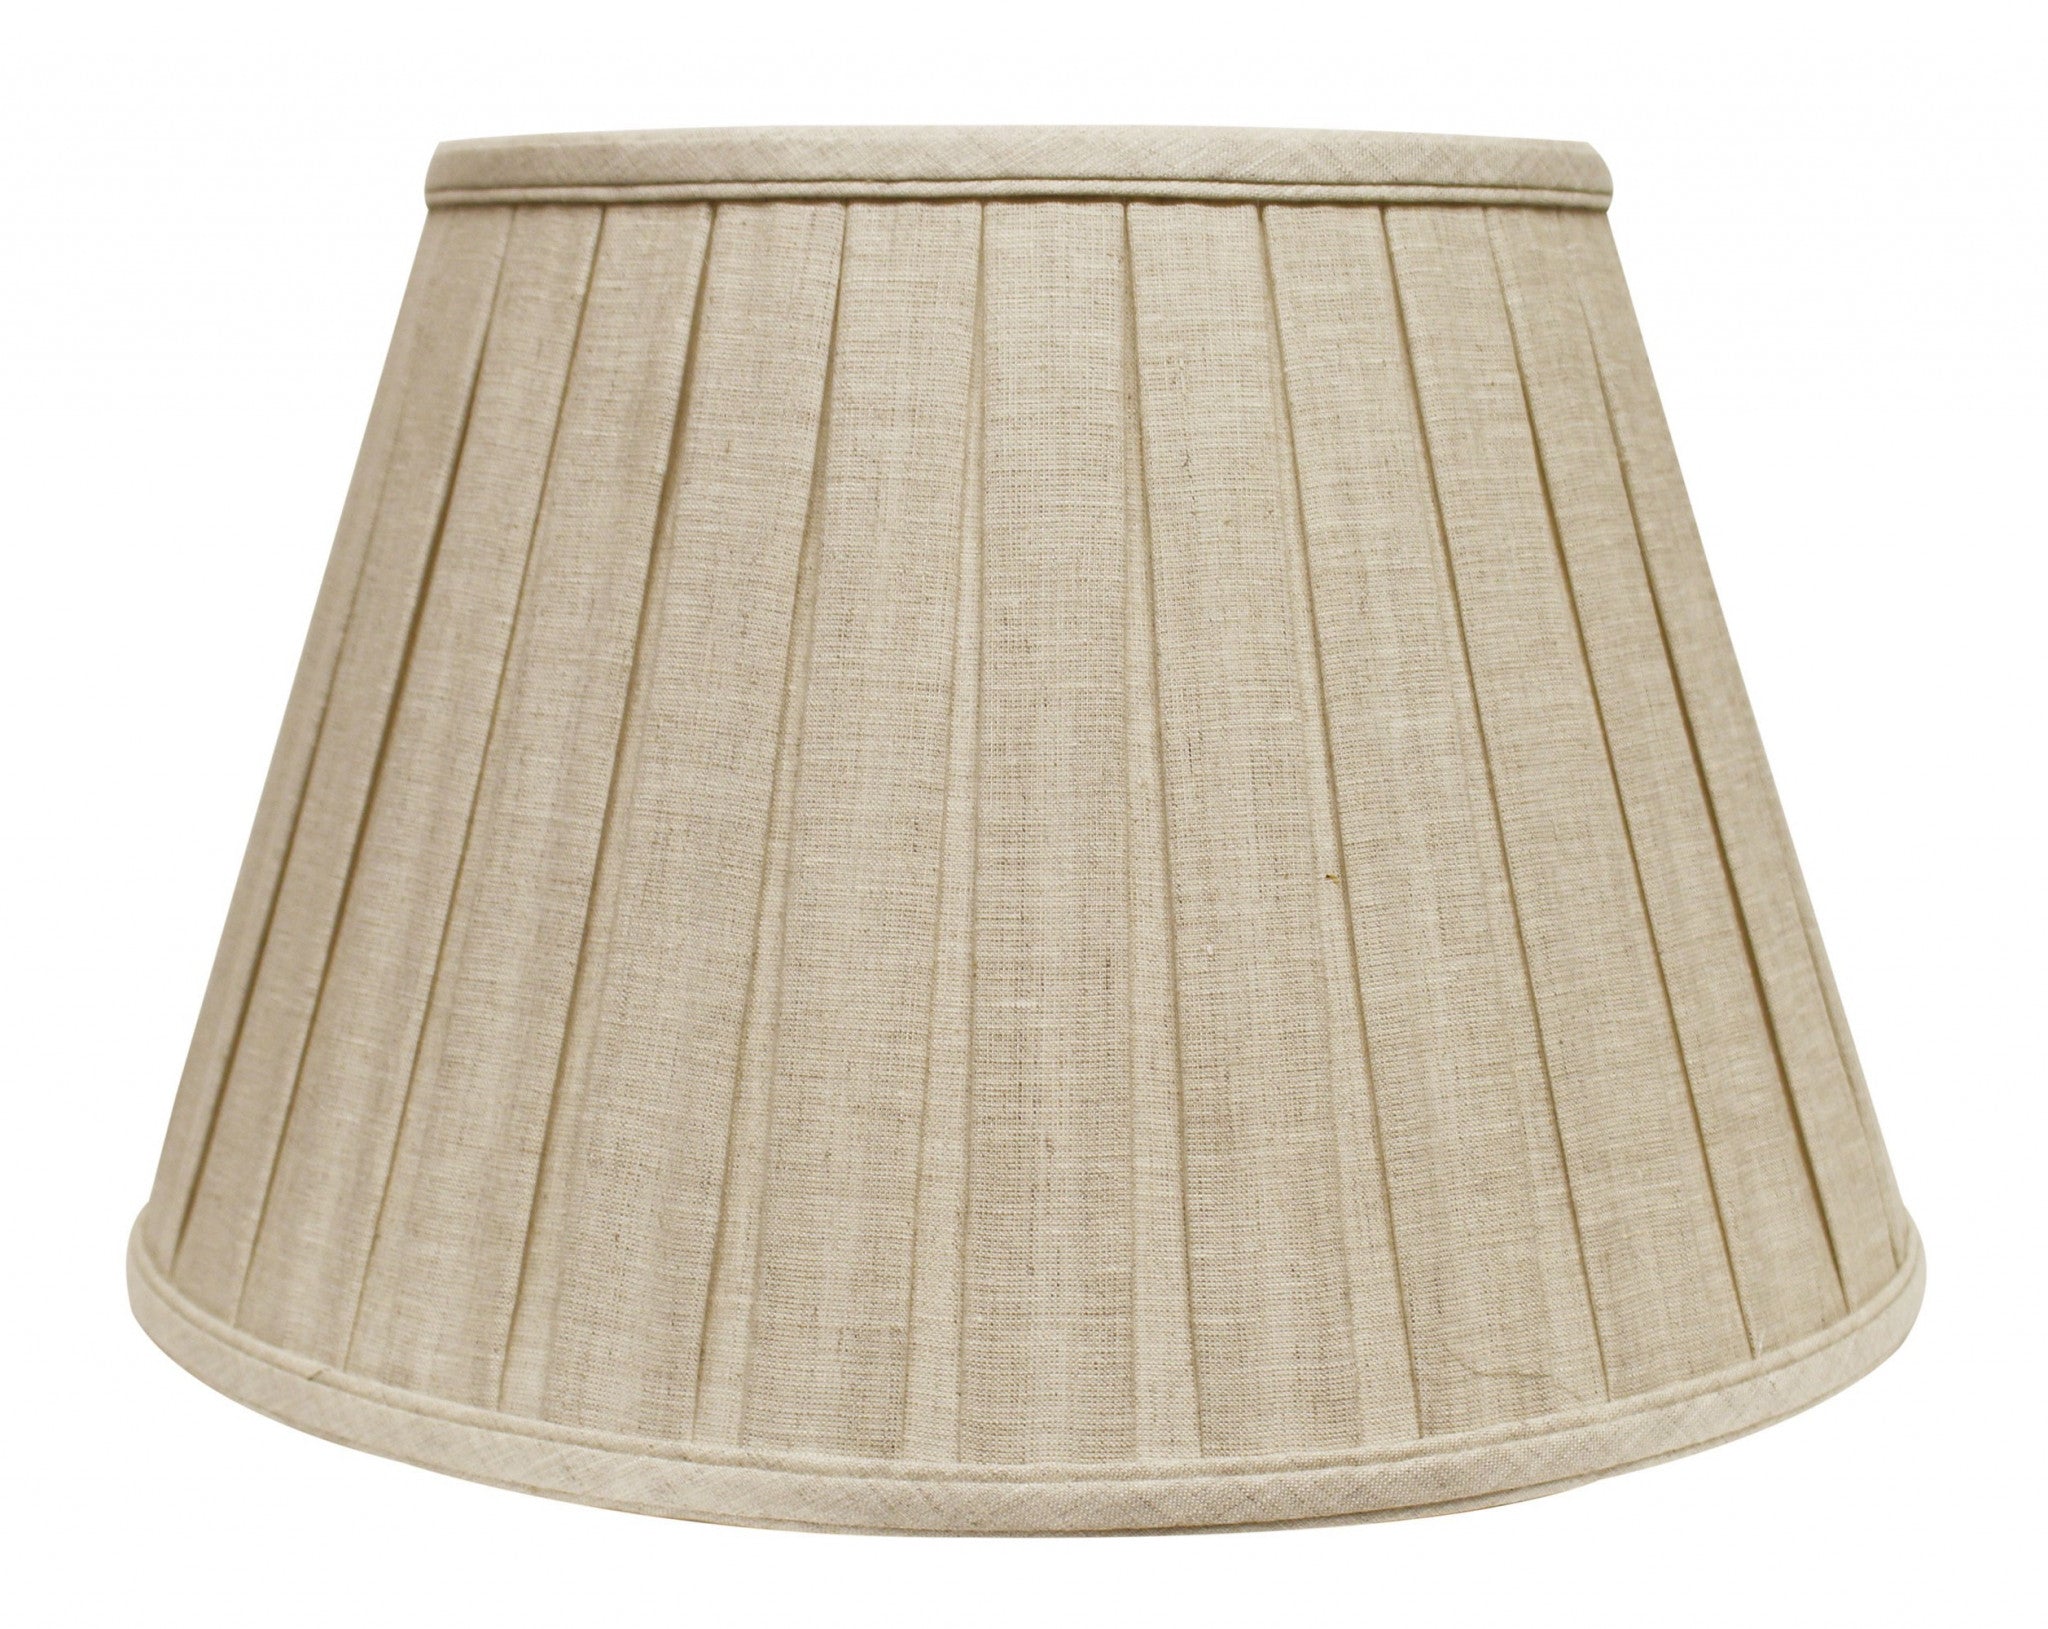 14" Cream Slanted Paperback Linen Lampshade with Box Pleat